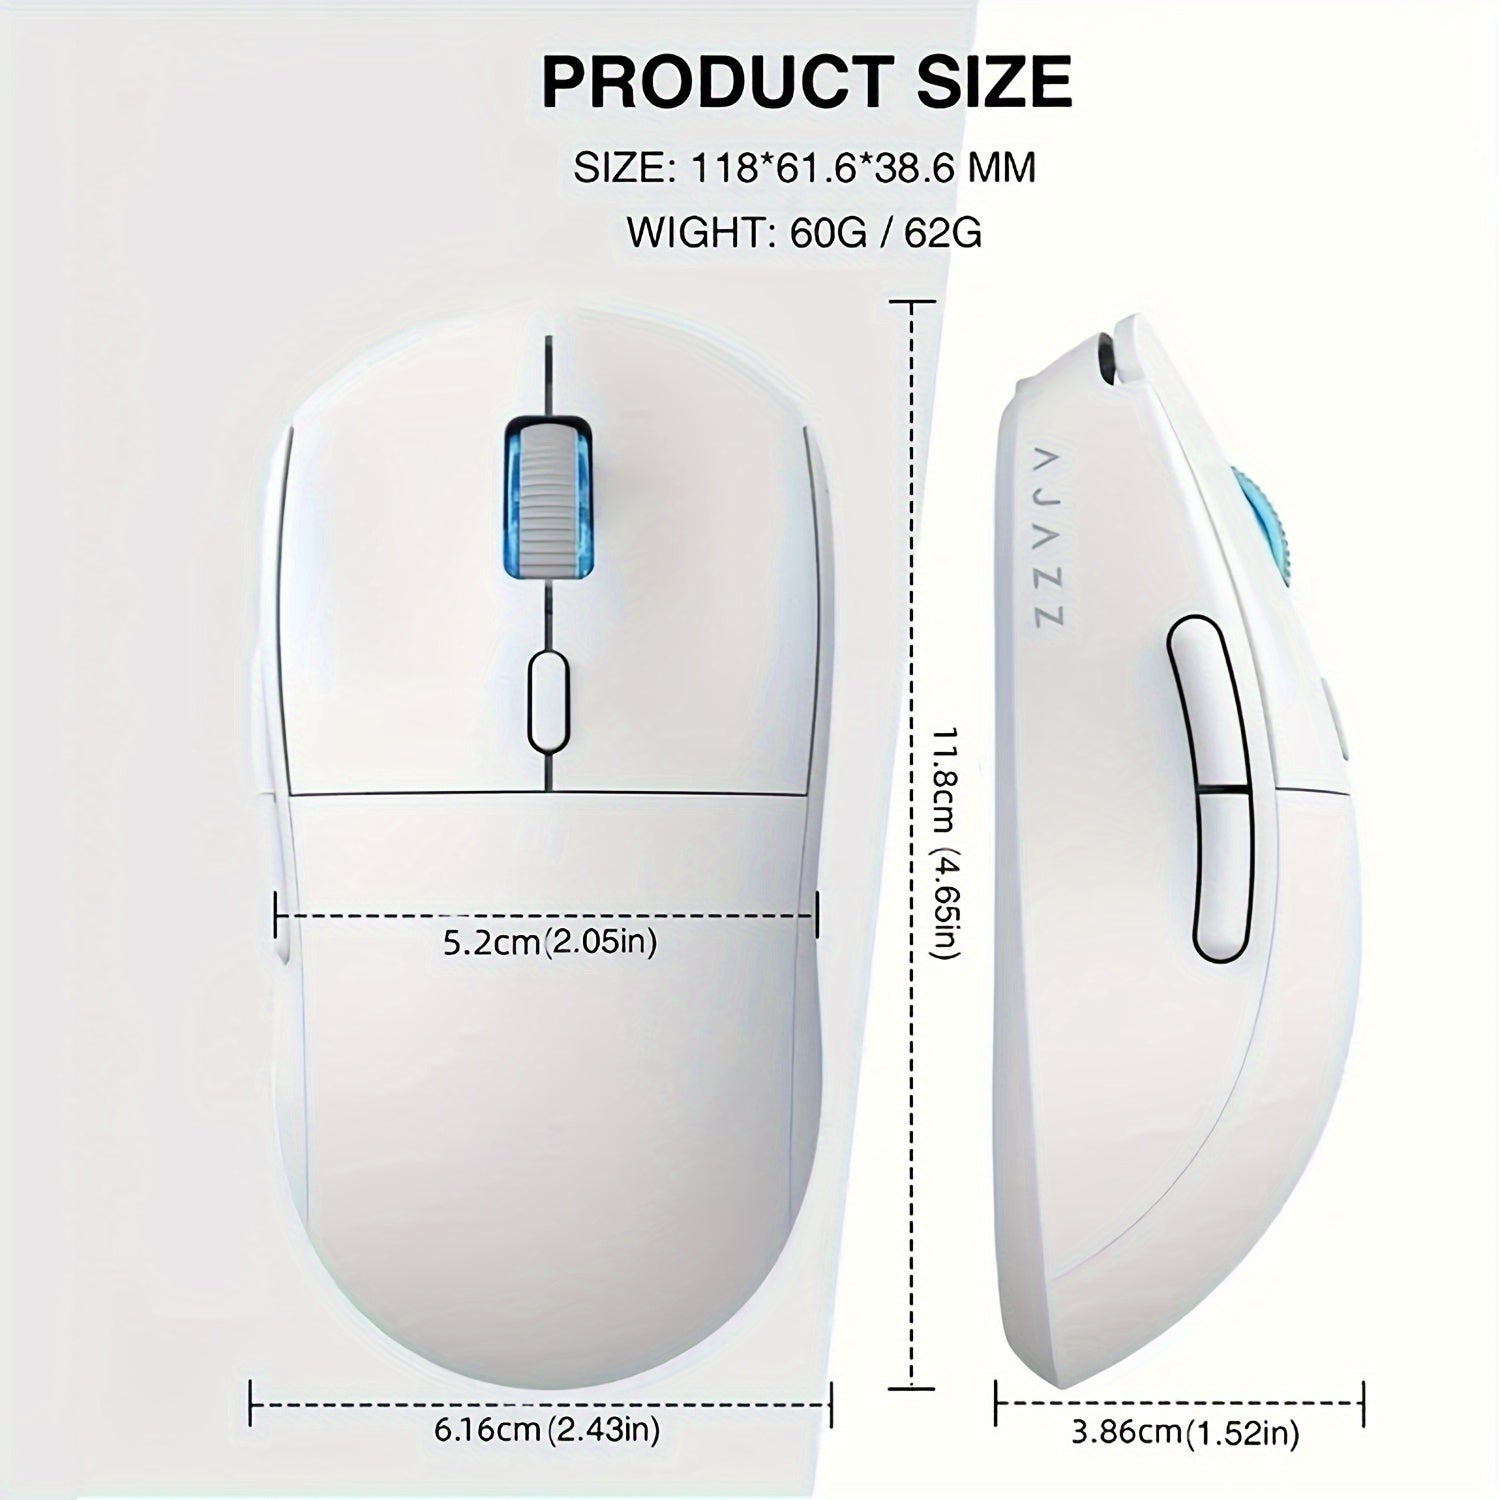 AJAZZ 4K Return Rate Lightweight Gaming Mouse: 65g Ultralight Mouse, Supports Wireless Connection, 60 Hours Battery Life